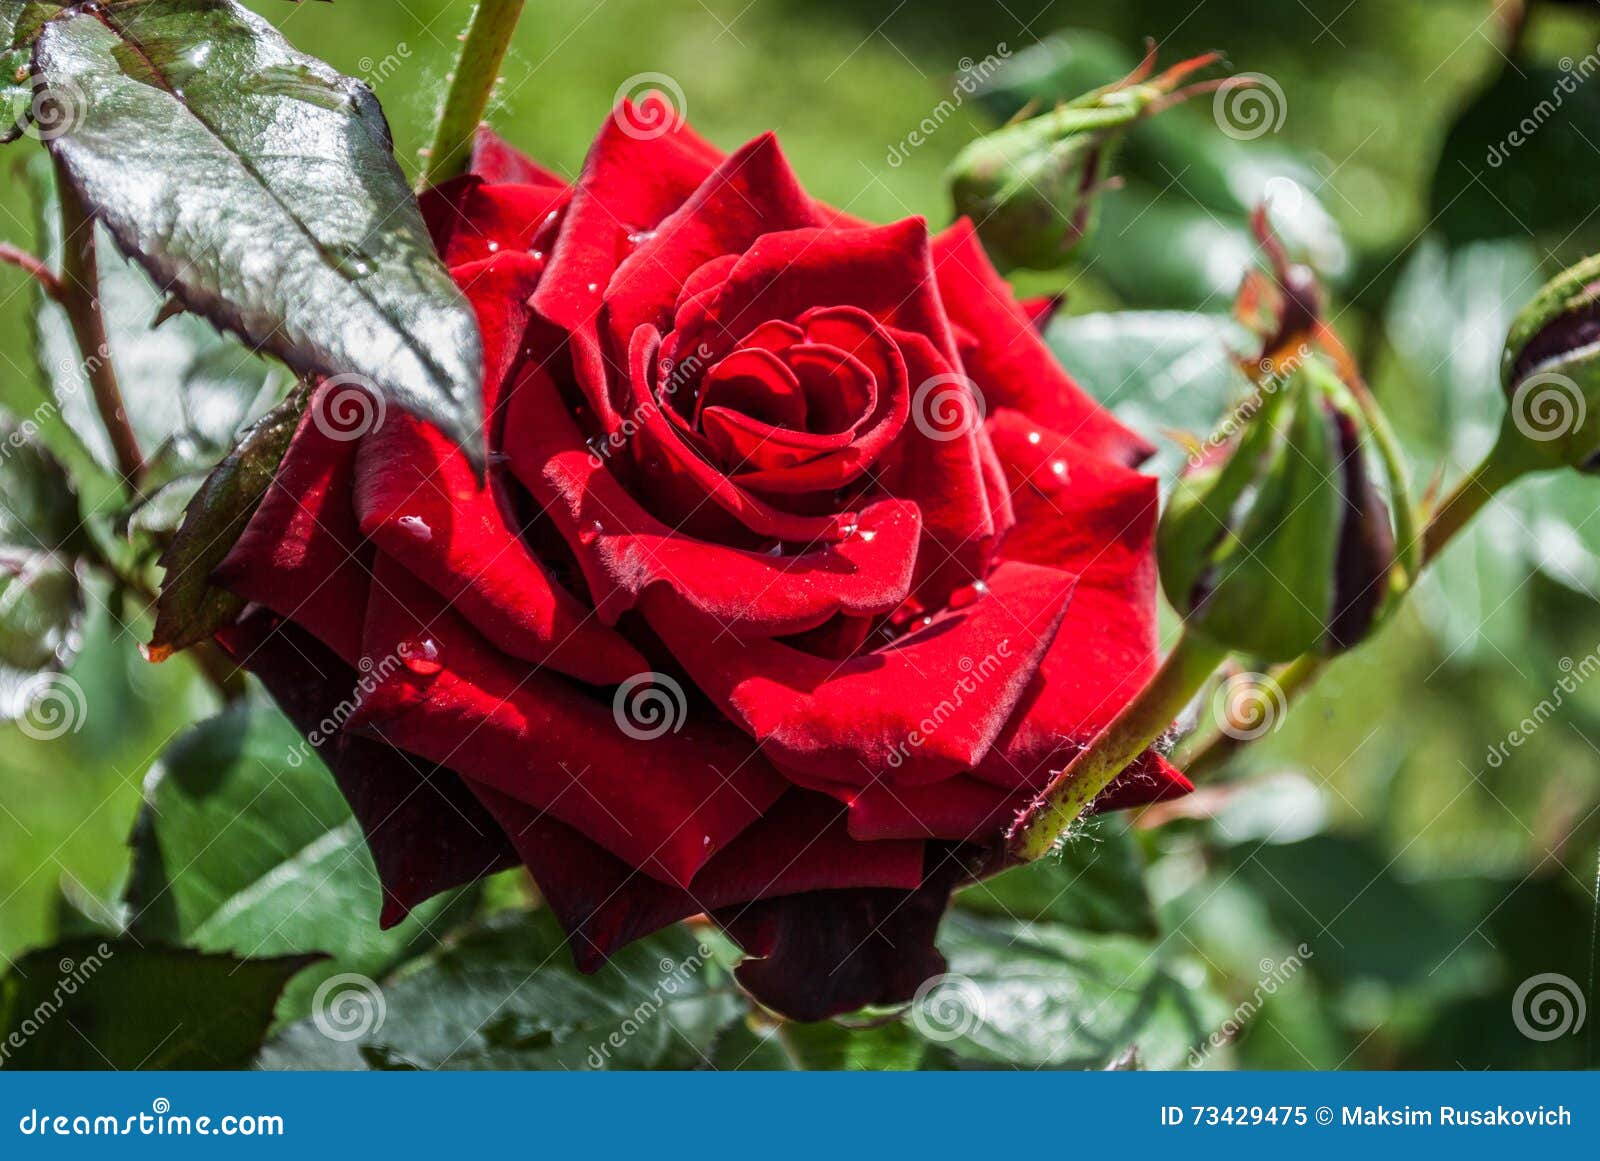 Natural Red Roses Background / Stock Image - Image of color, nature